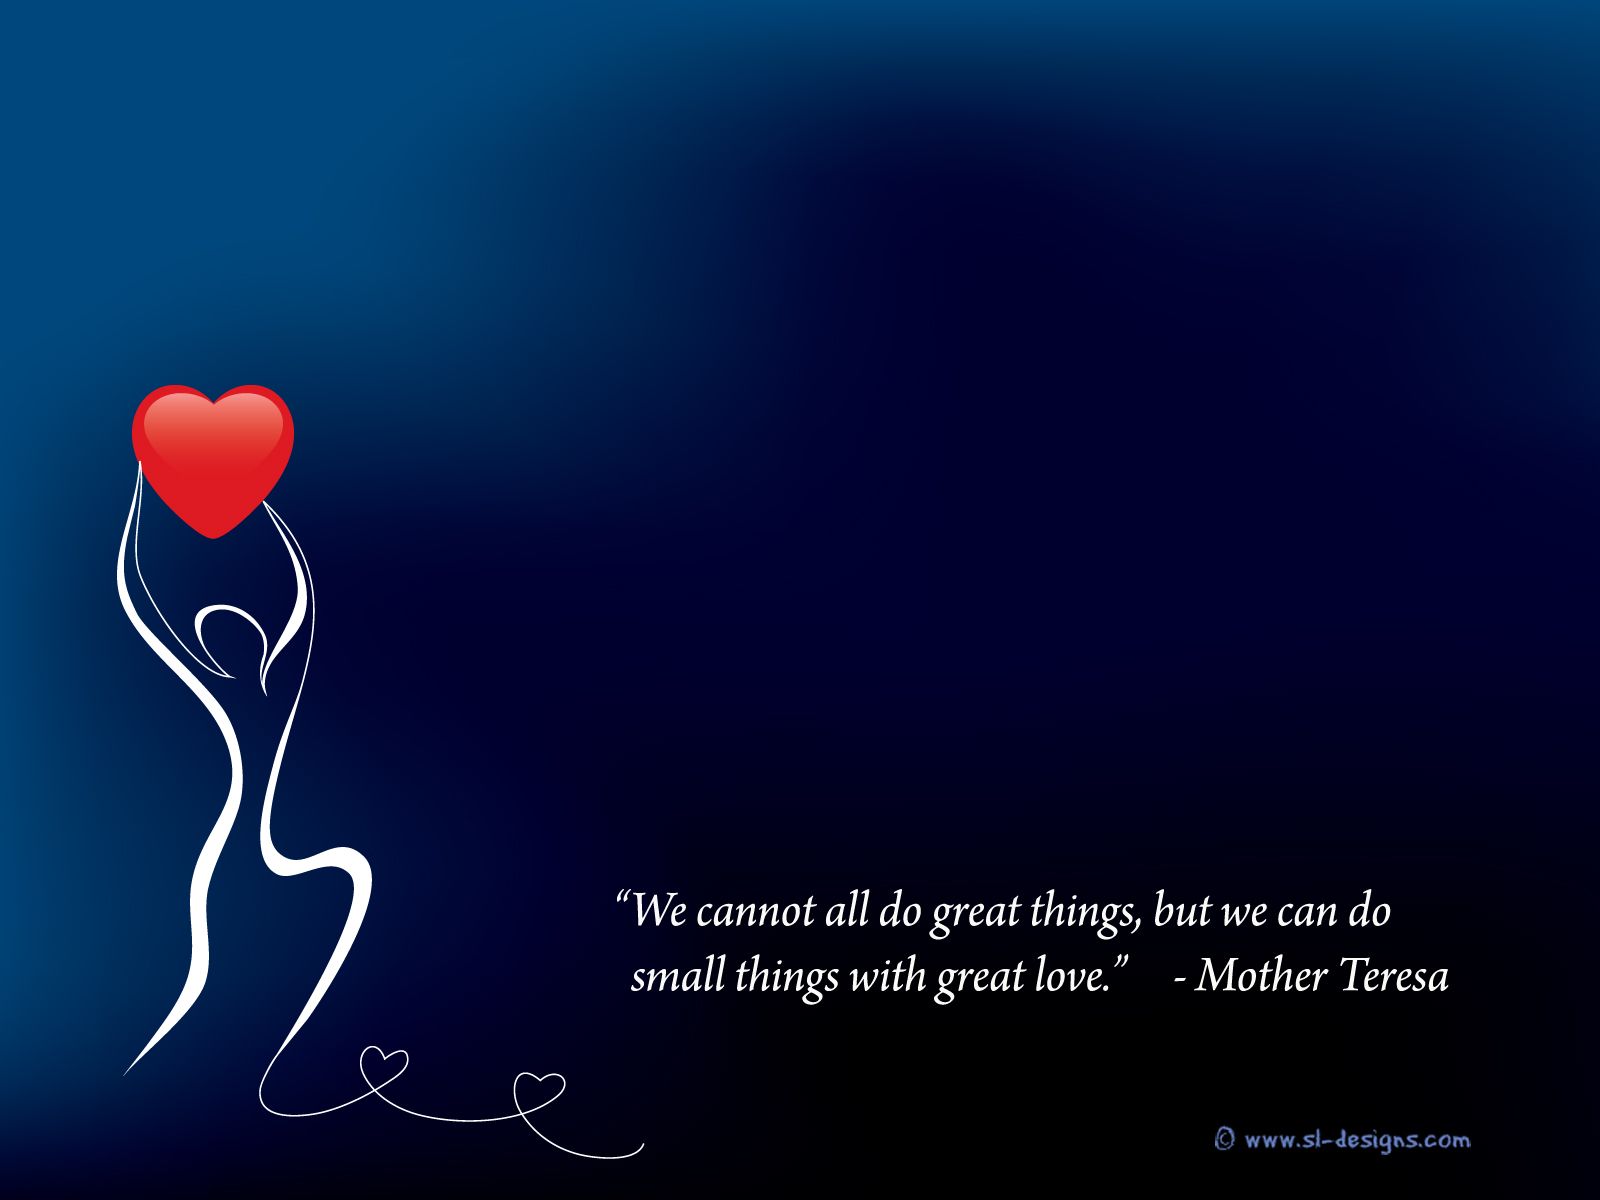 We Cannot All Do Great Things, But We Can Do Small Things With Great Love. Teresa On Wallpaper. SL Designs